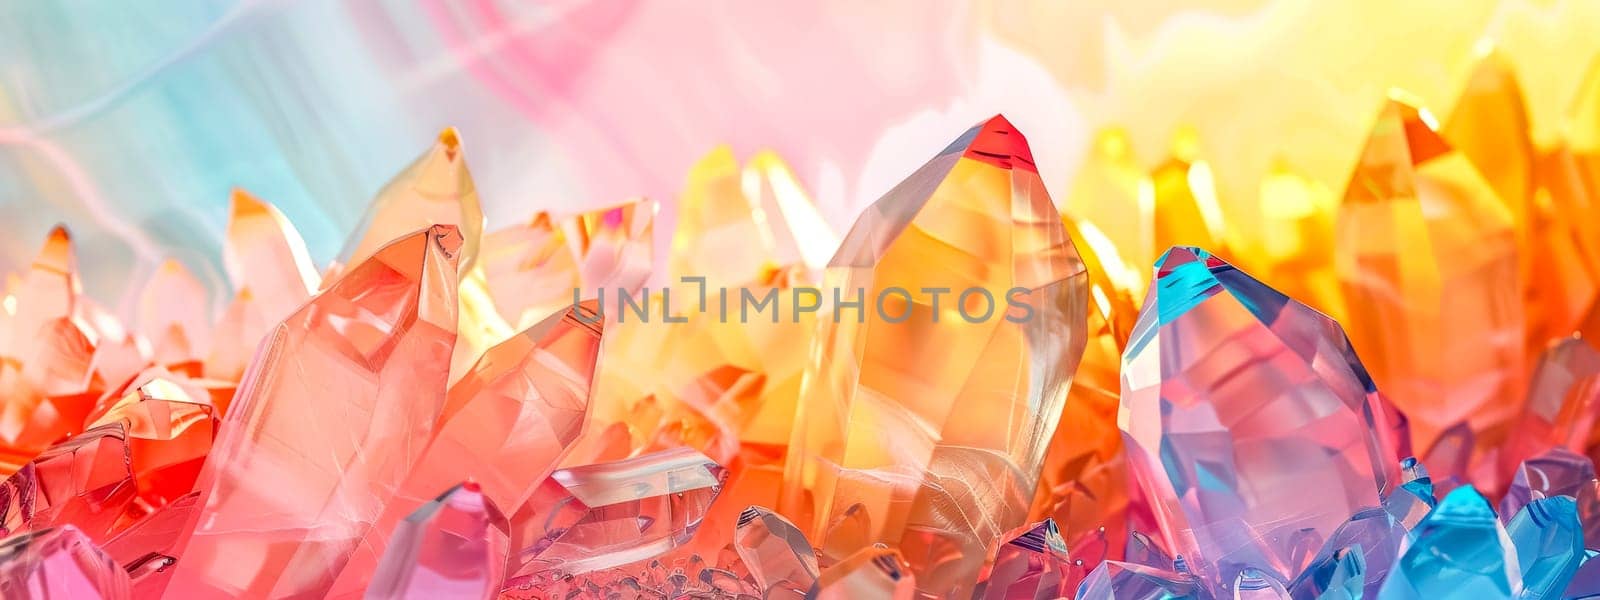 Panoramic view of colorful crystal formations in a vibrant rainbow spectrum by Edophoto